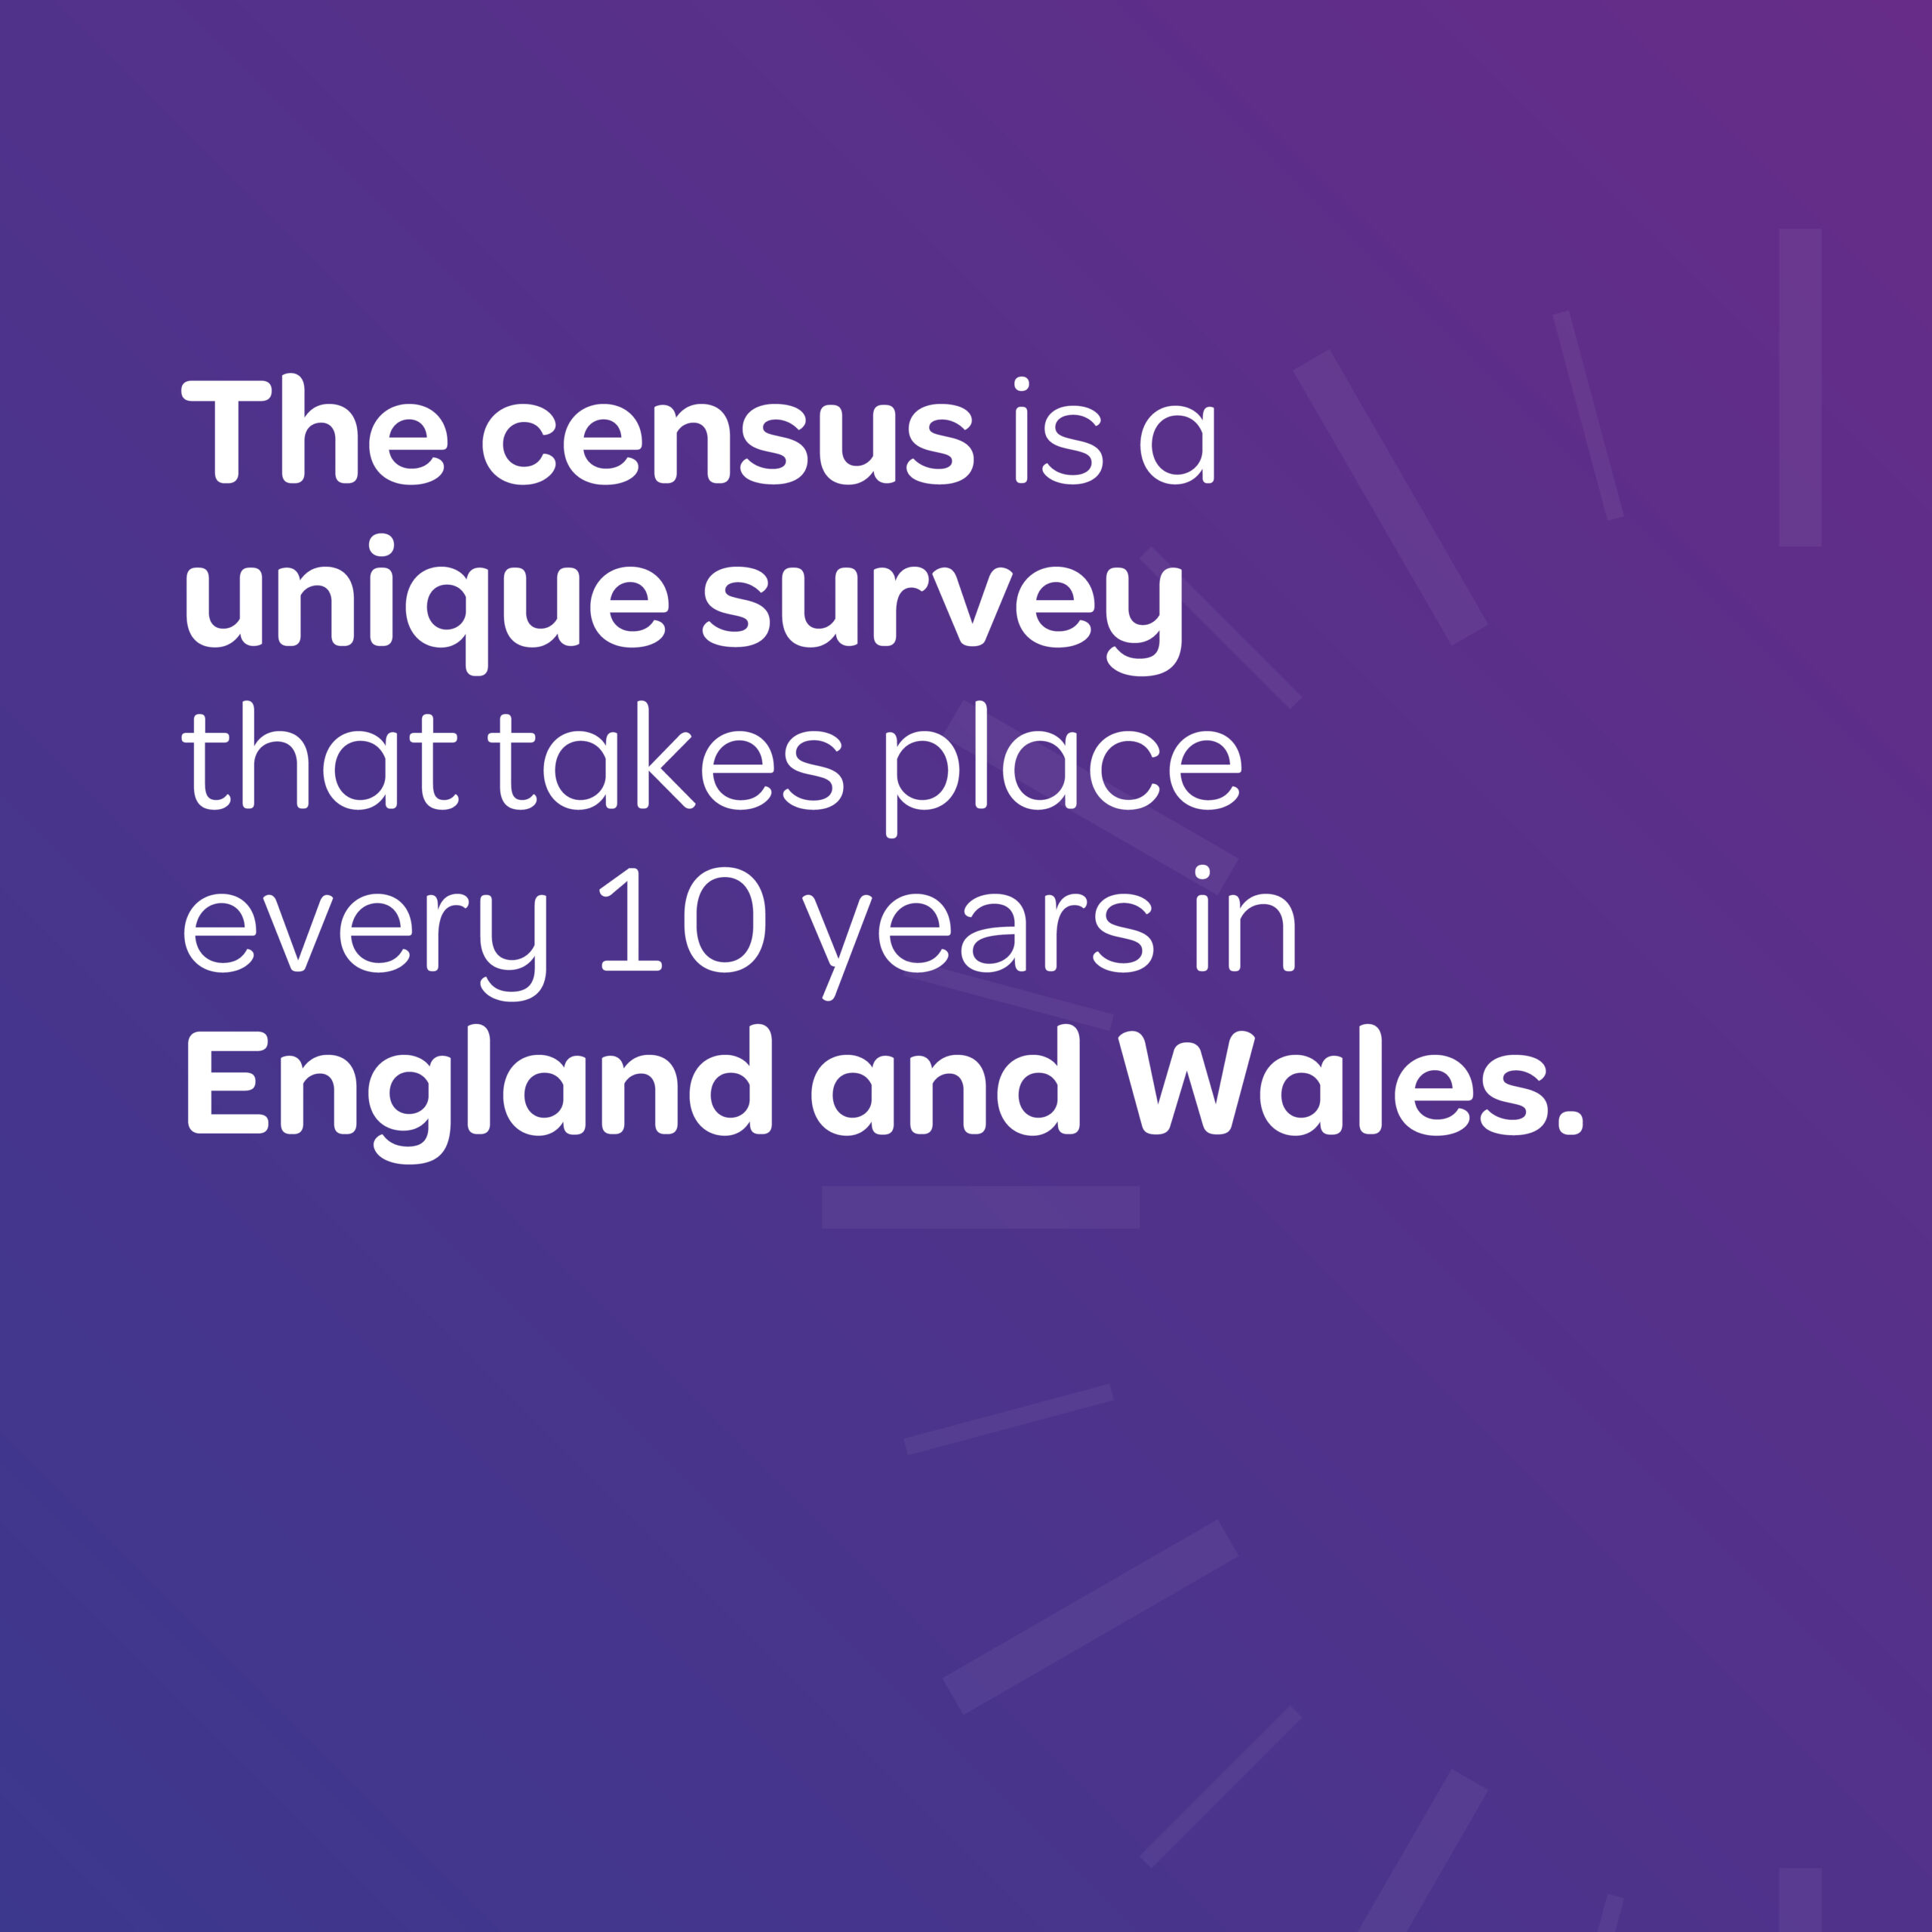 The census is a unique survey that takes place every 10 years in England and Wales